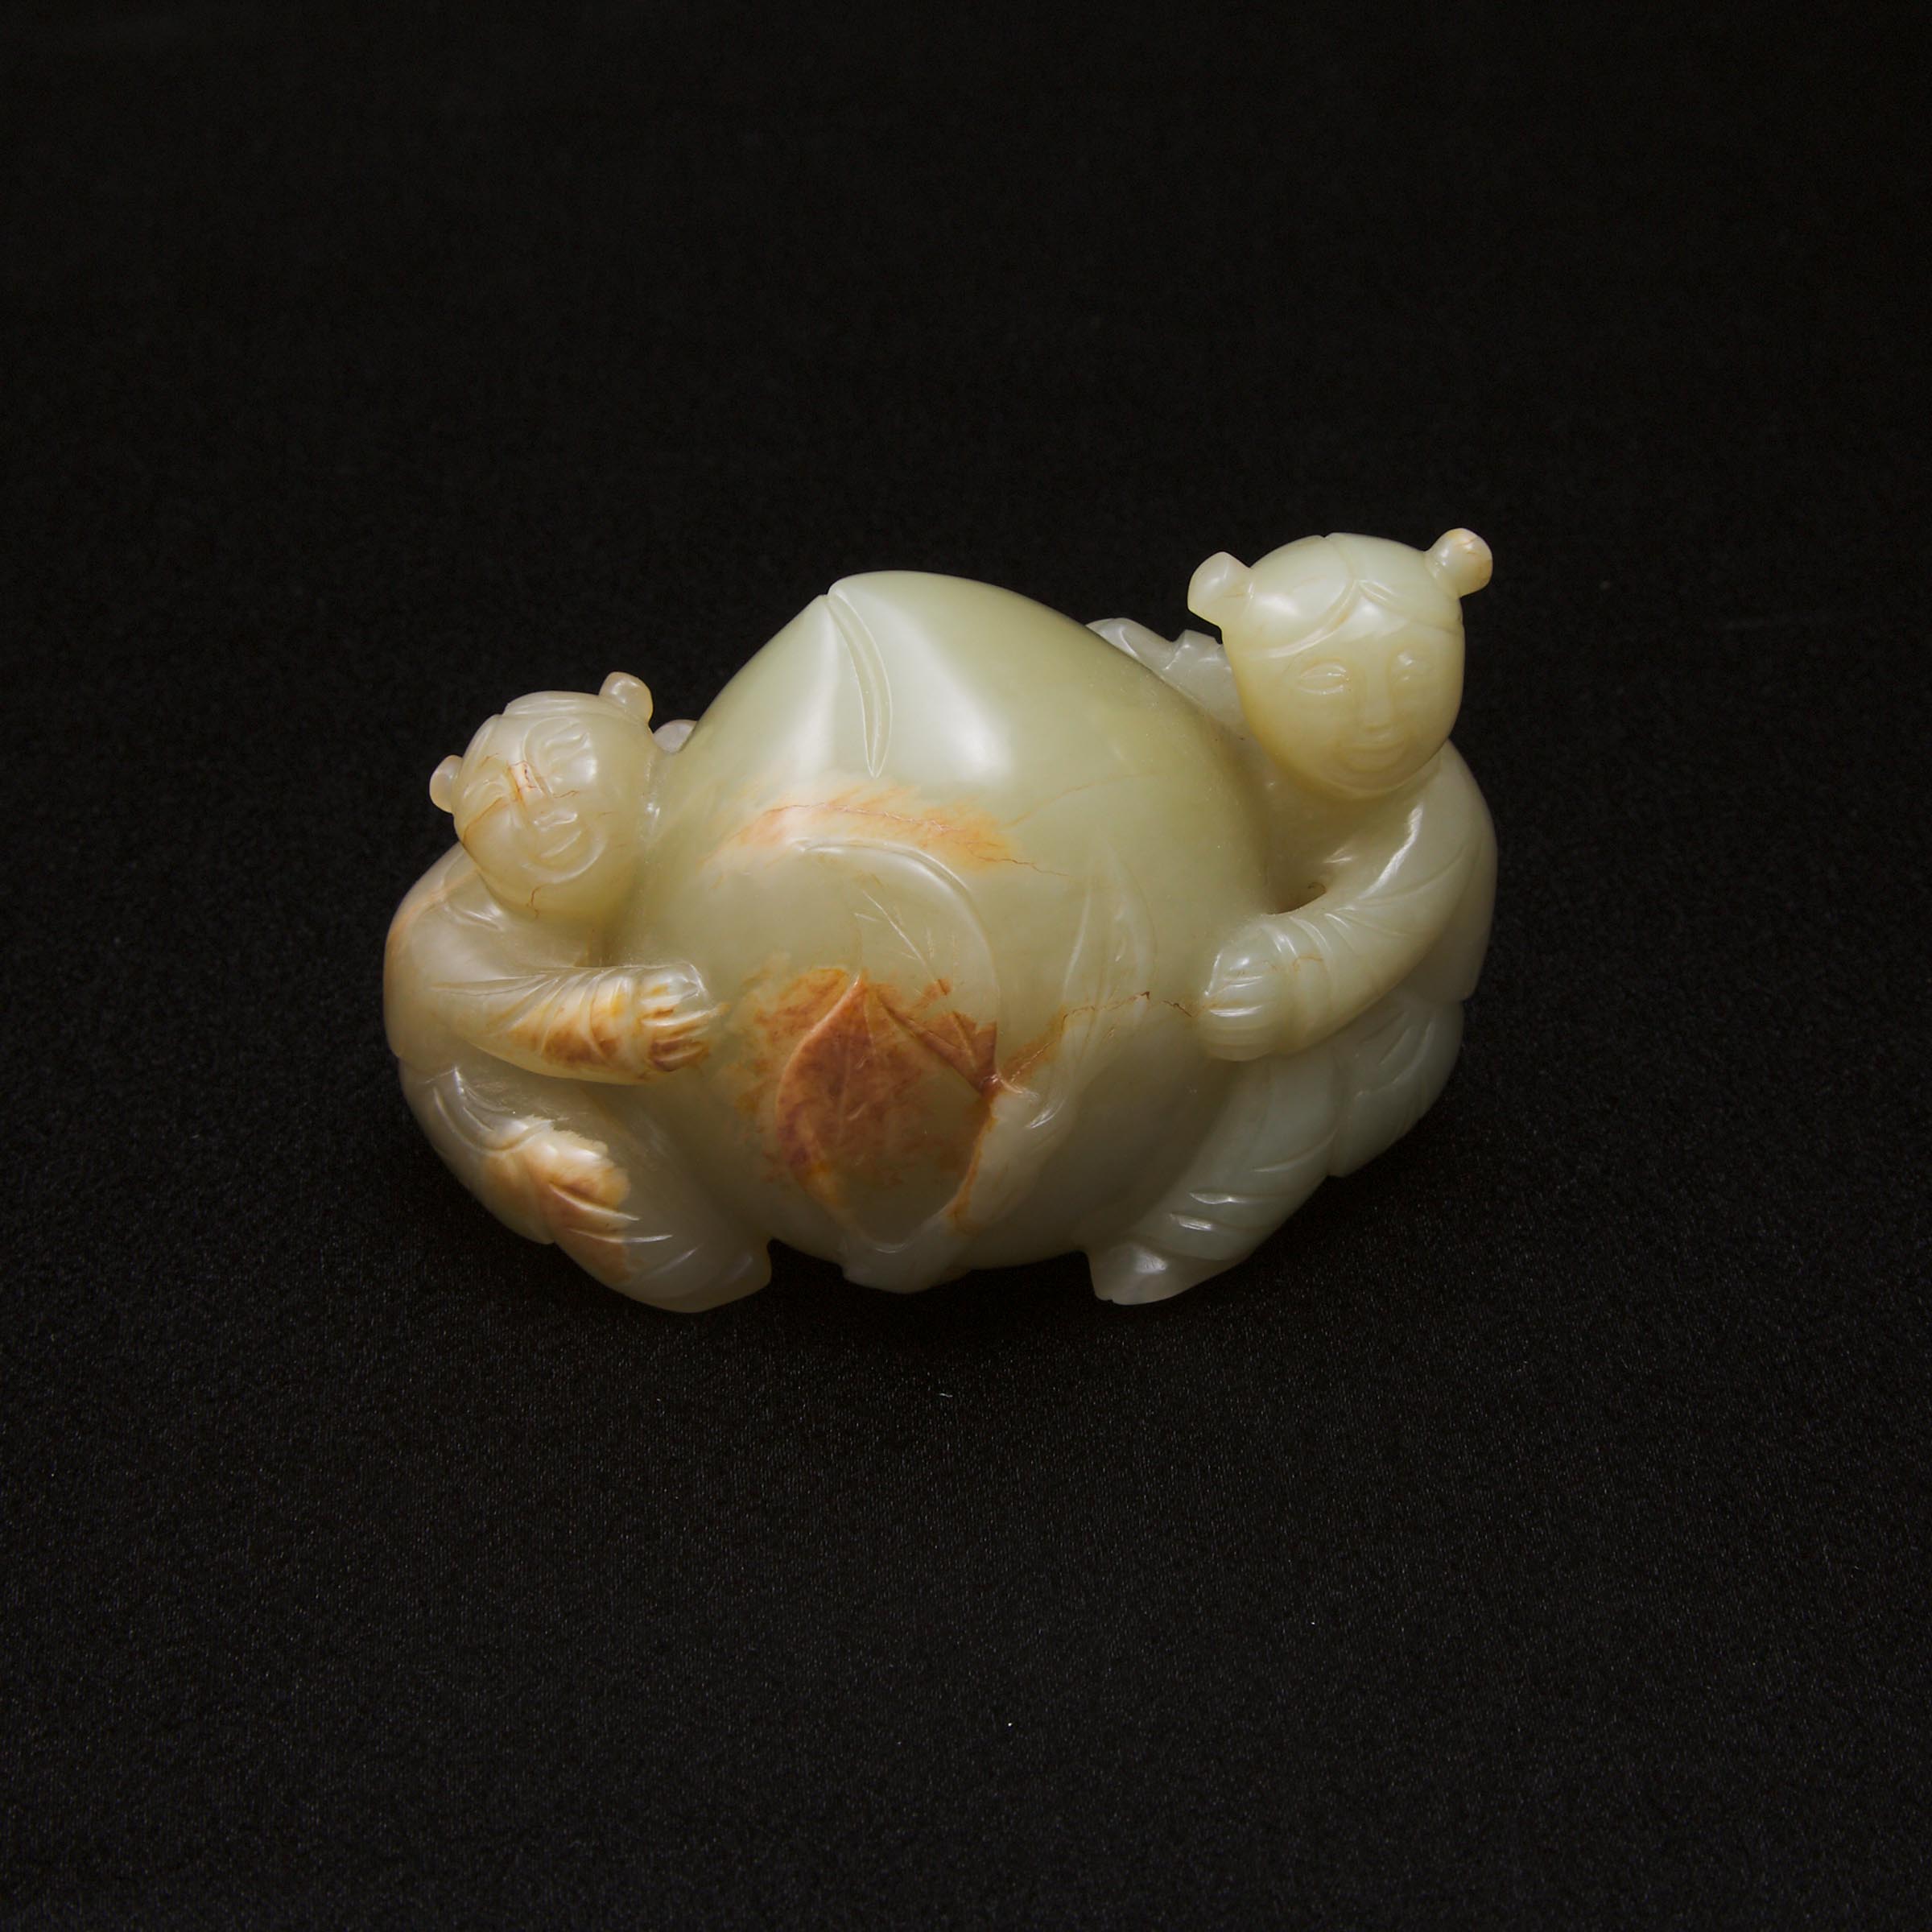 A Celadon and Russet Jade 'Boys and Peach' Carving